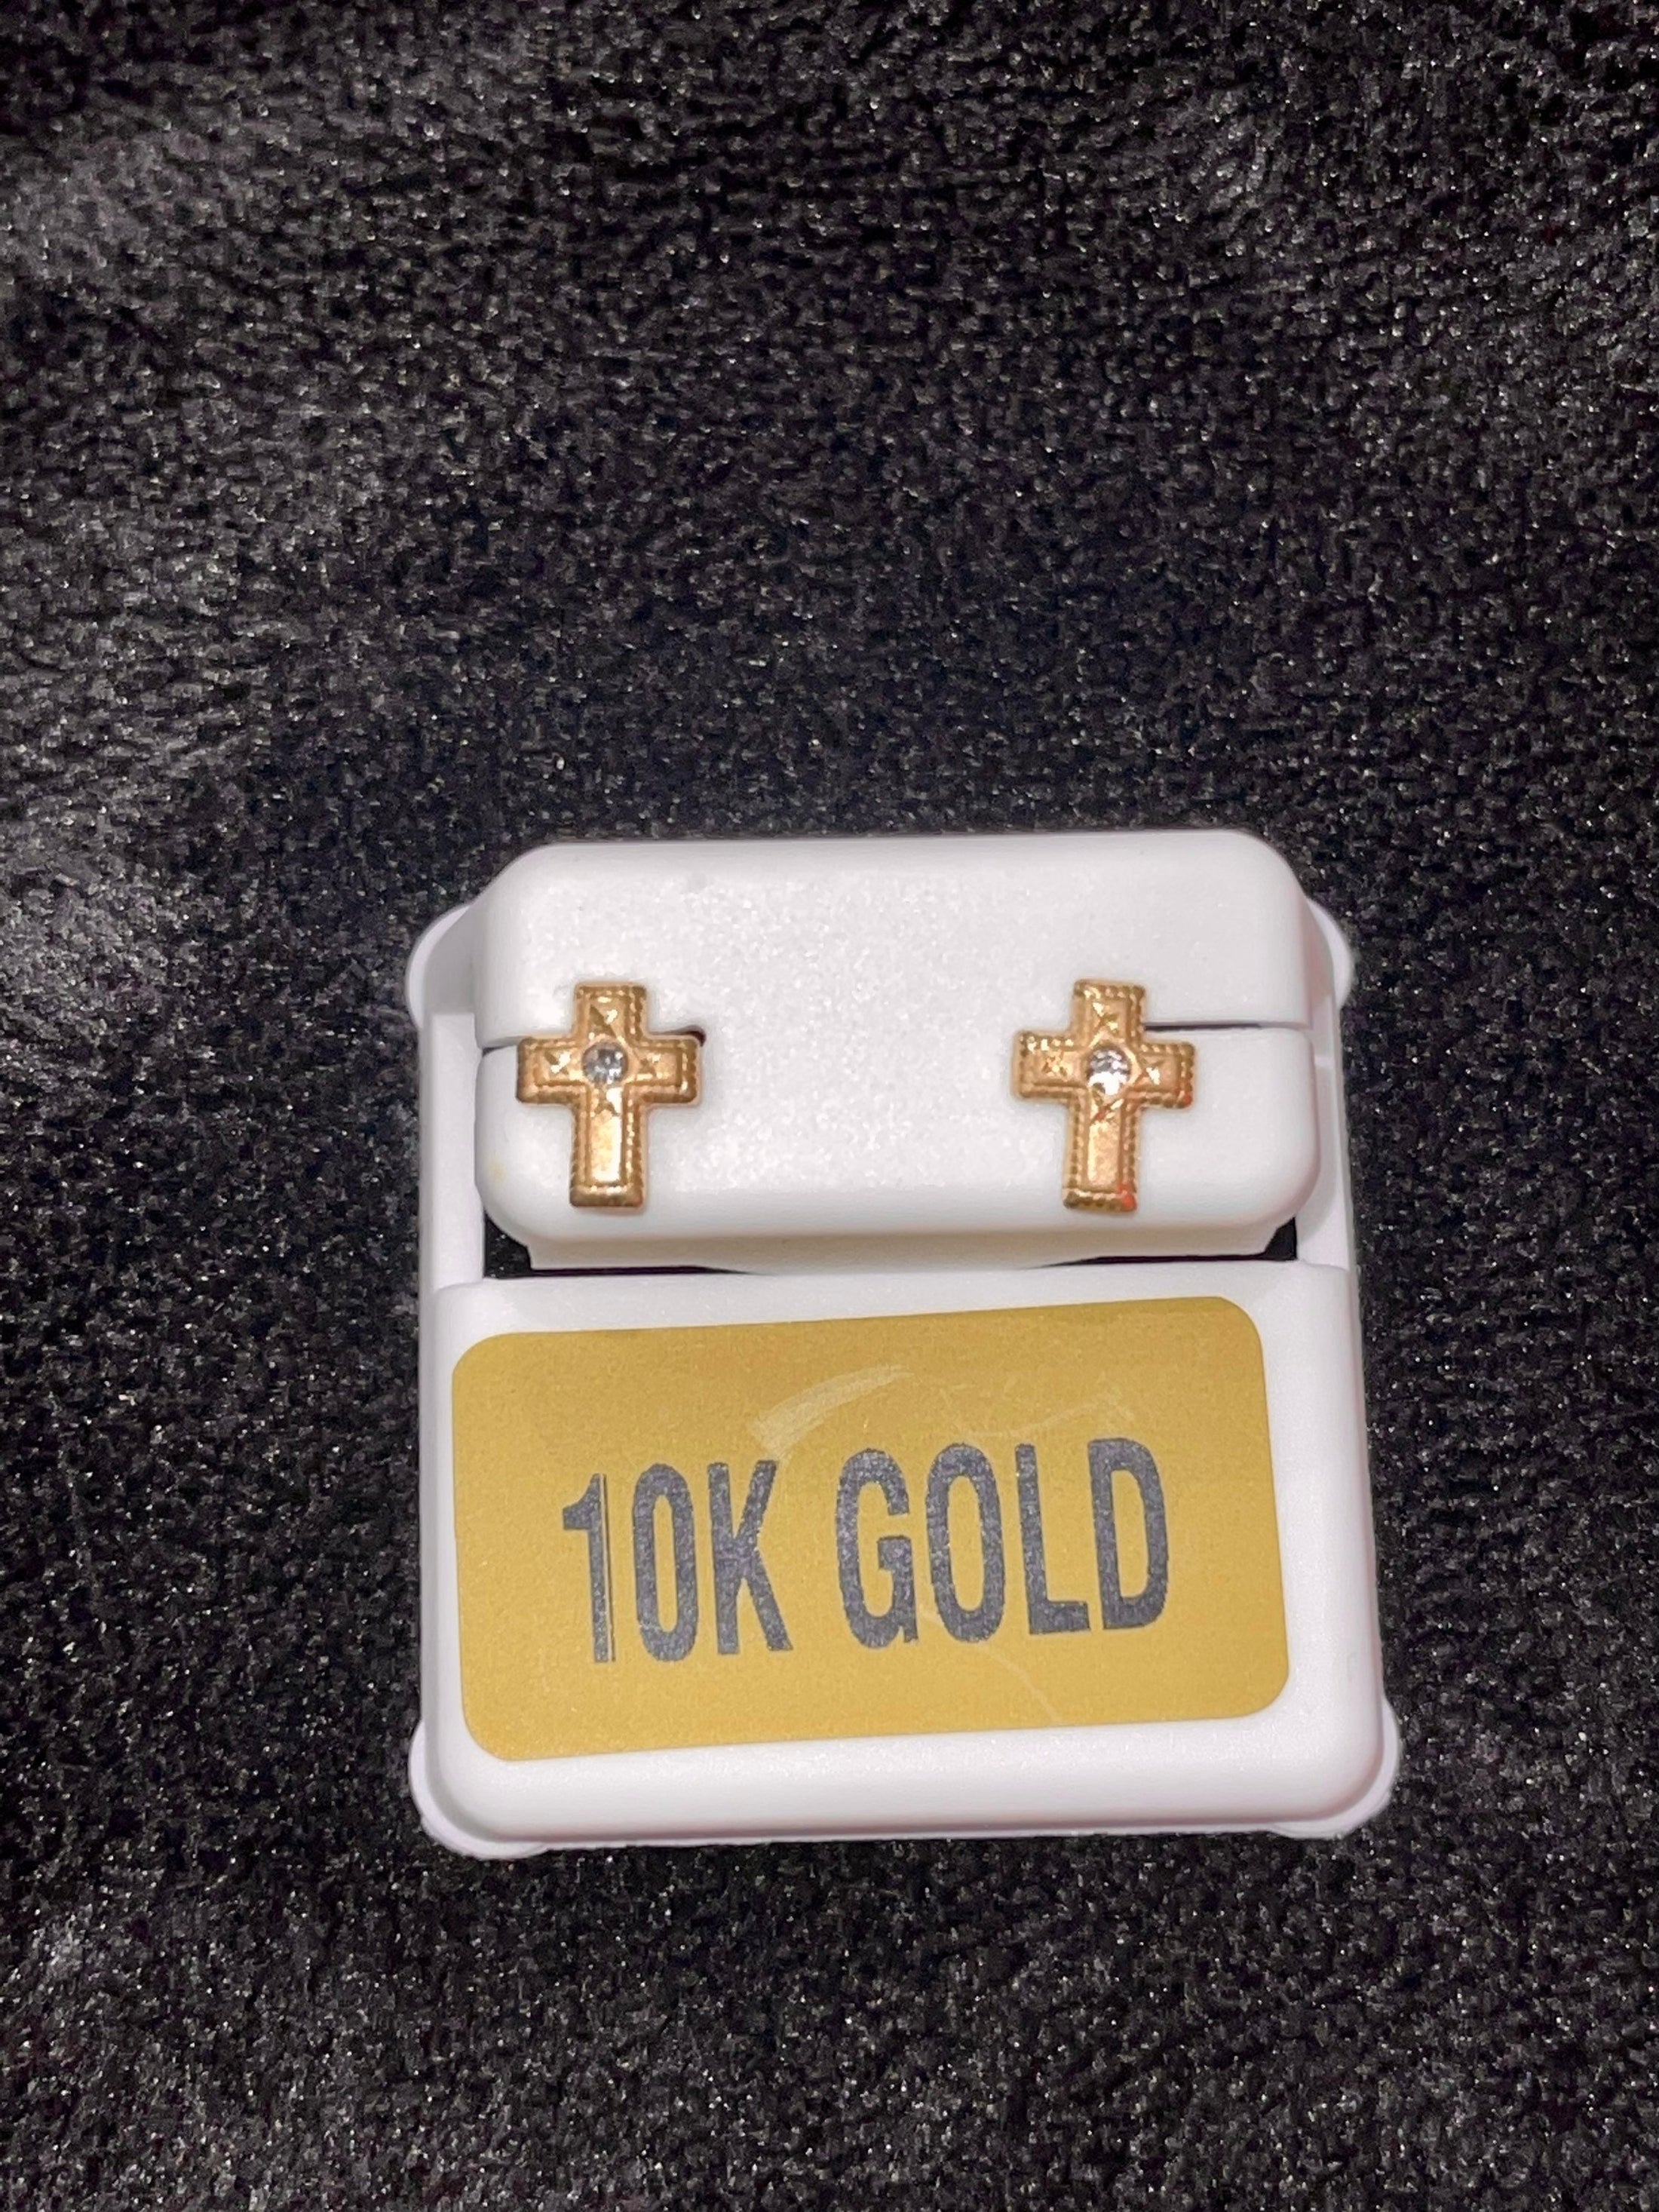 10k Real Gold Cross Earrings, Solid gold earrings for Men/Women/kids, NOT Plated, Gifts for Kids, Gifts for him, Gifts for her, Christening,